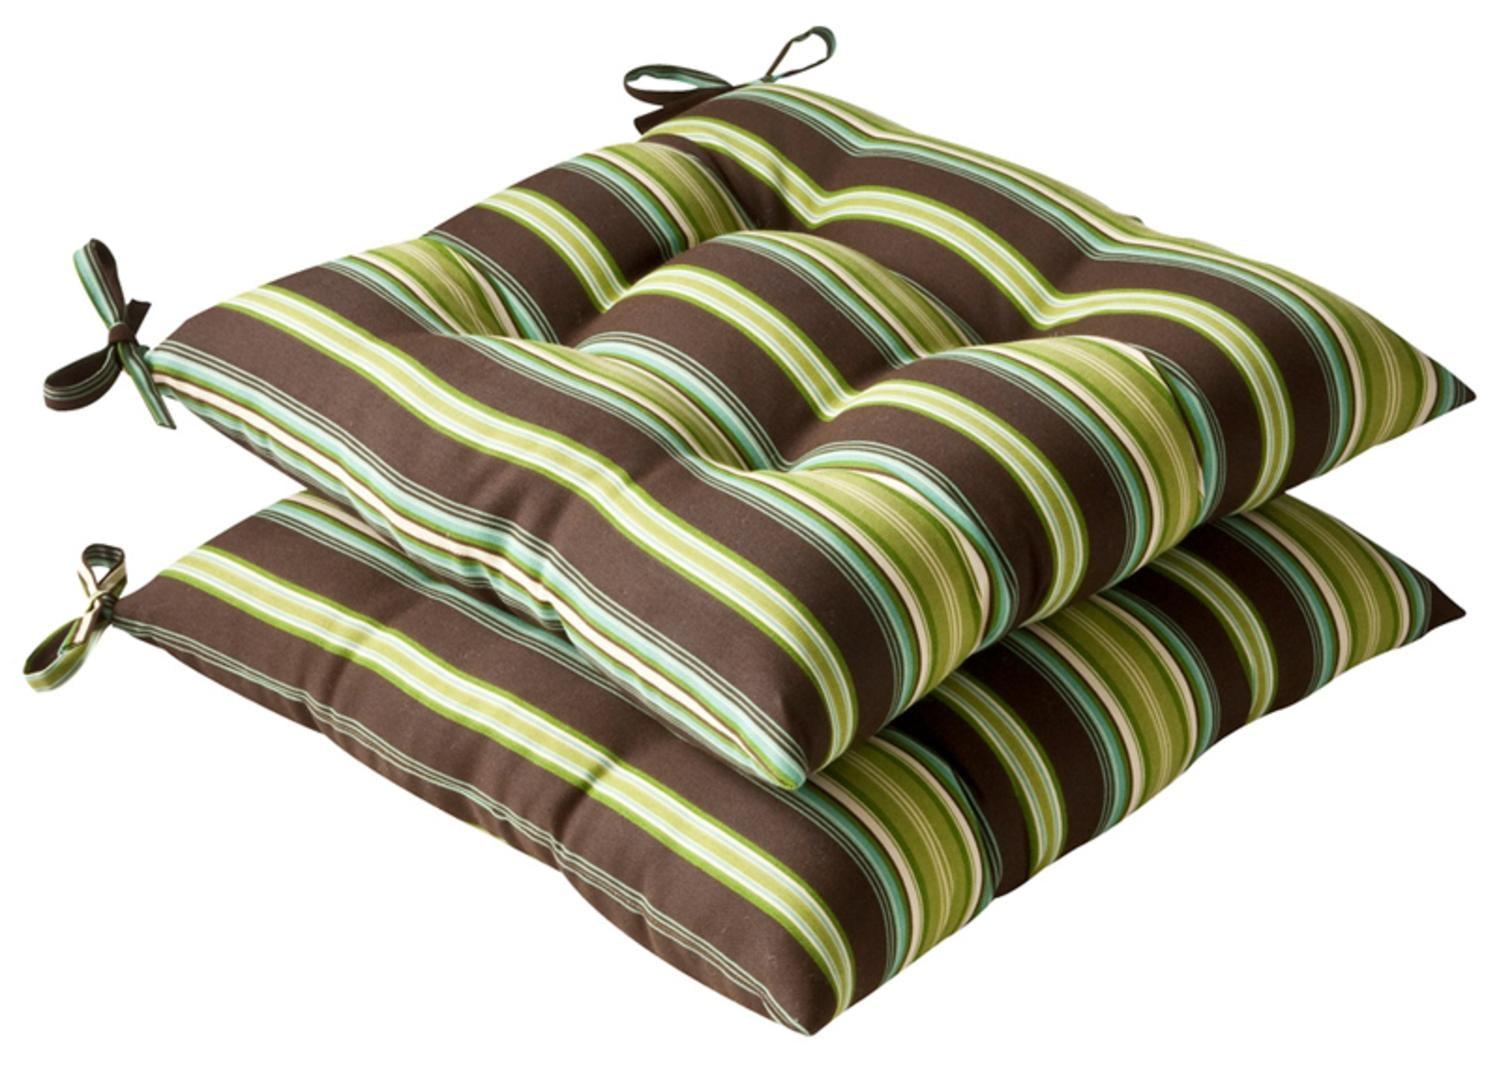 Pack of 2 Outdoor Patio Tufted Chair Seat Cushions - Tropical Green